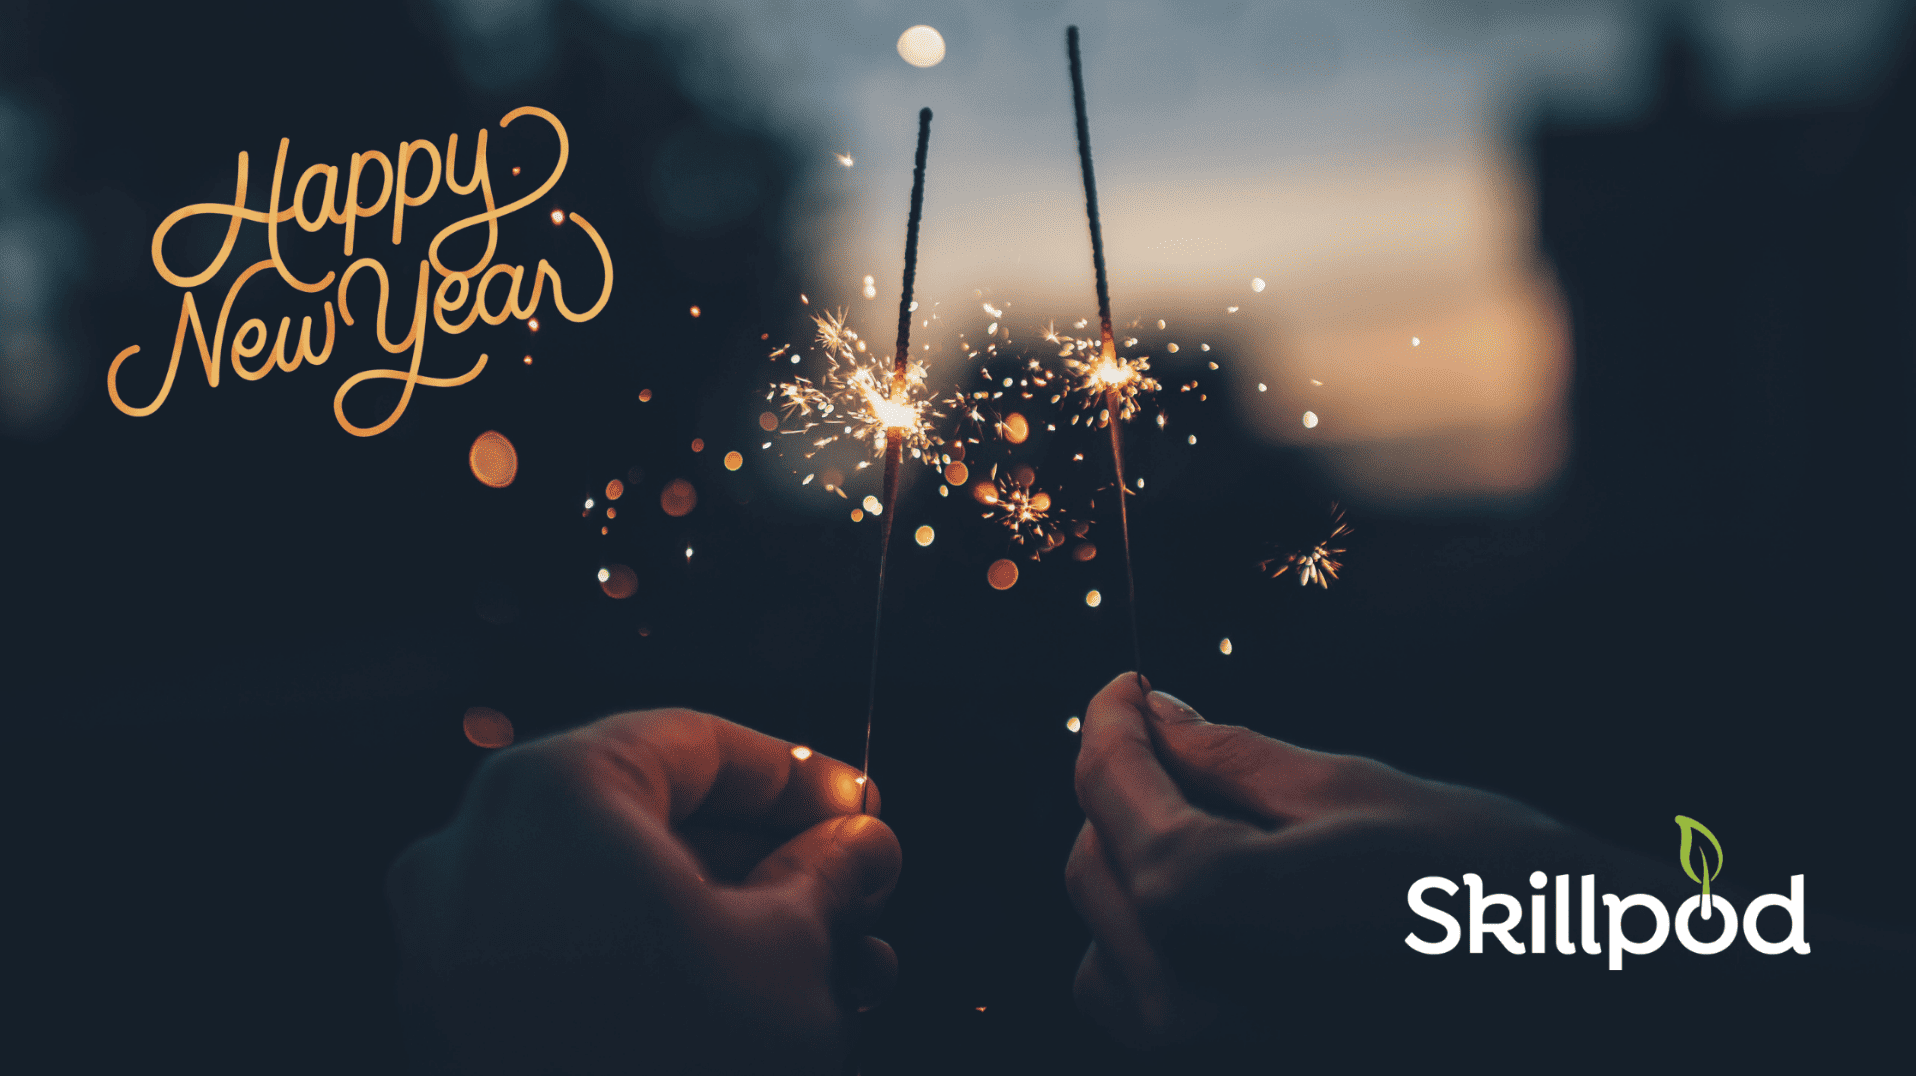 two hands holding sparklers with "happy new year" graphic